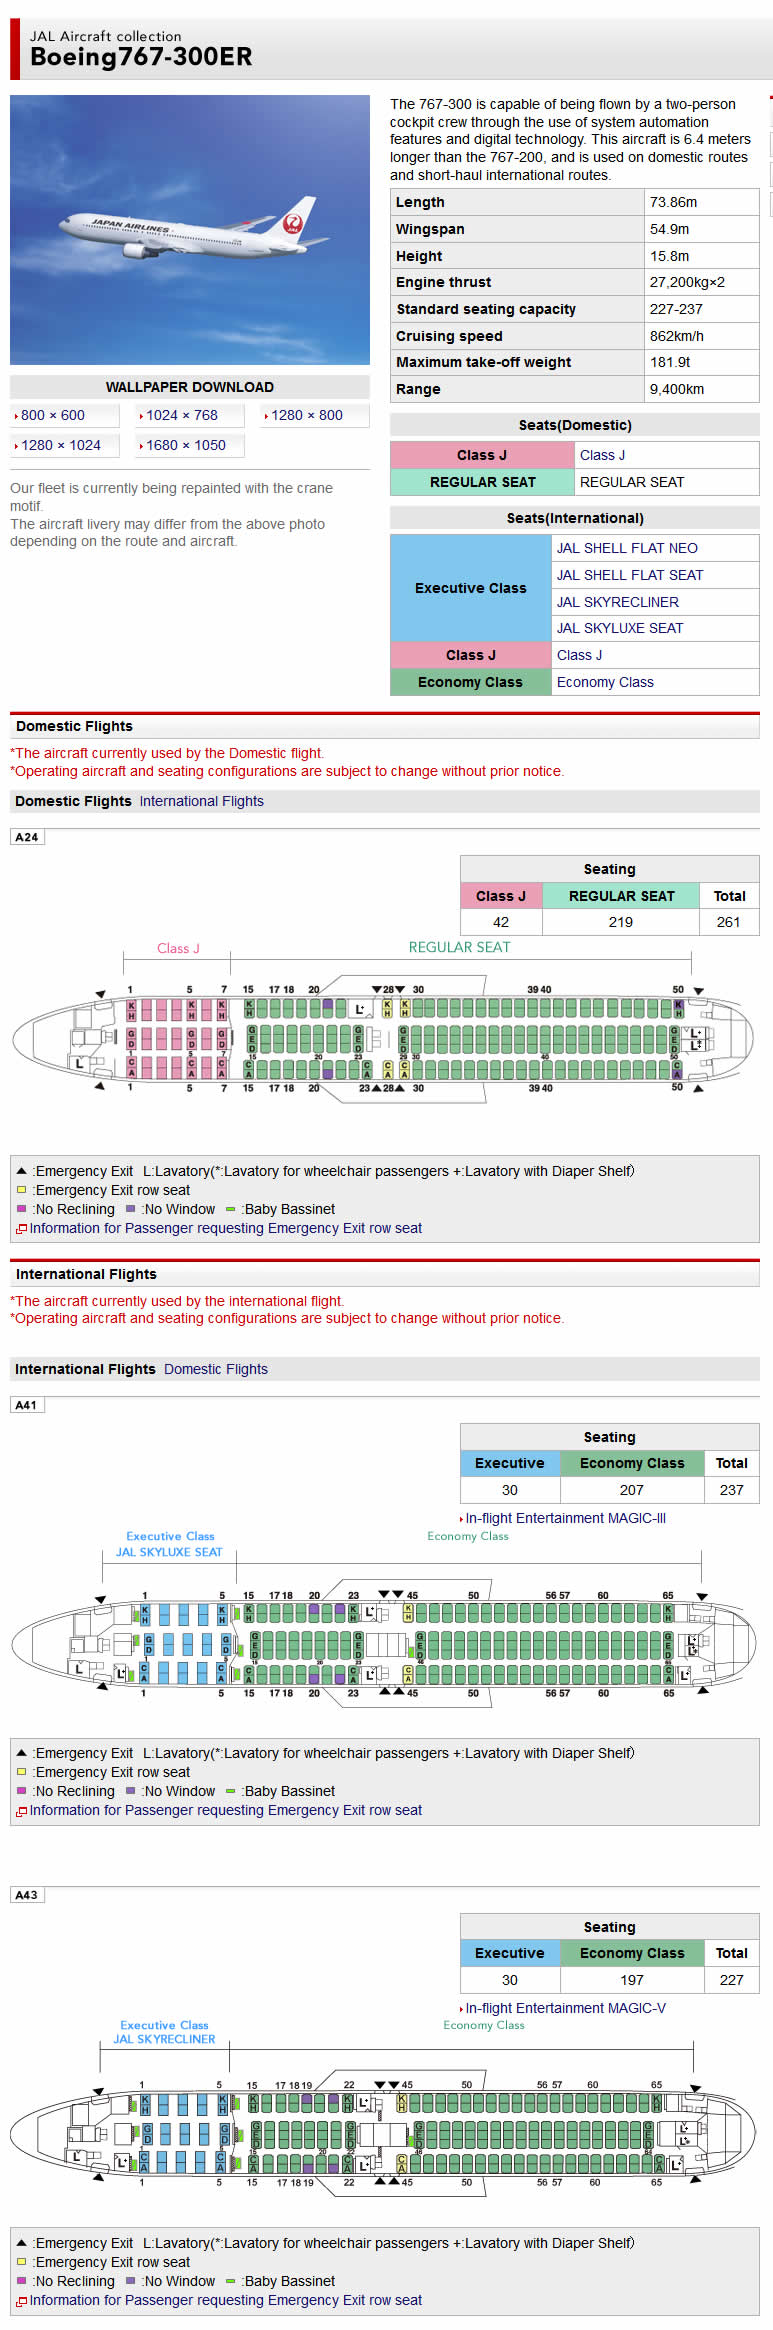 JAL JAPAN AIR AIRLINES BOEING 767-300ER AIRCRAFT SEATING CHART